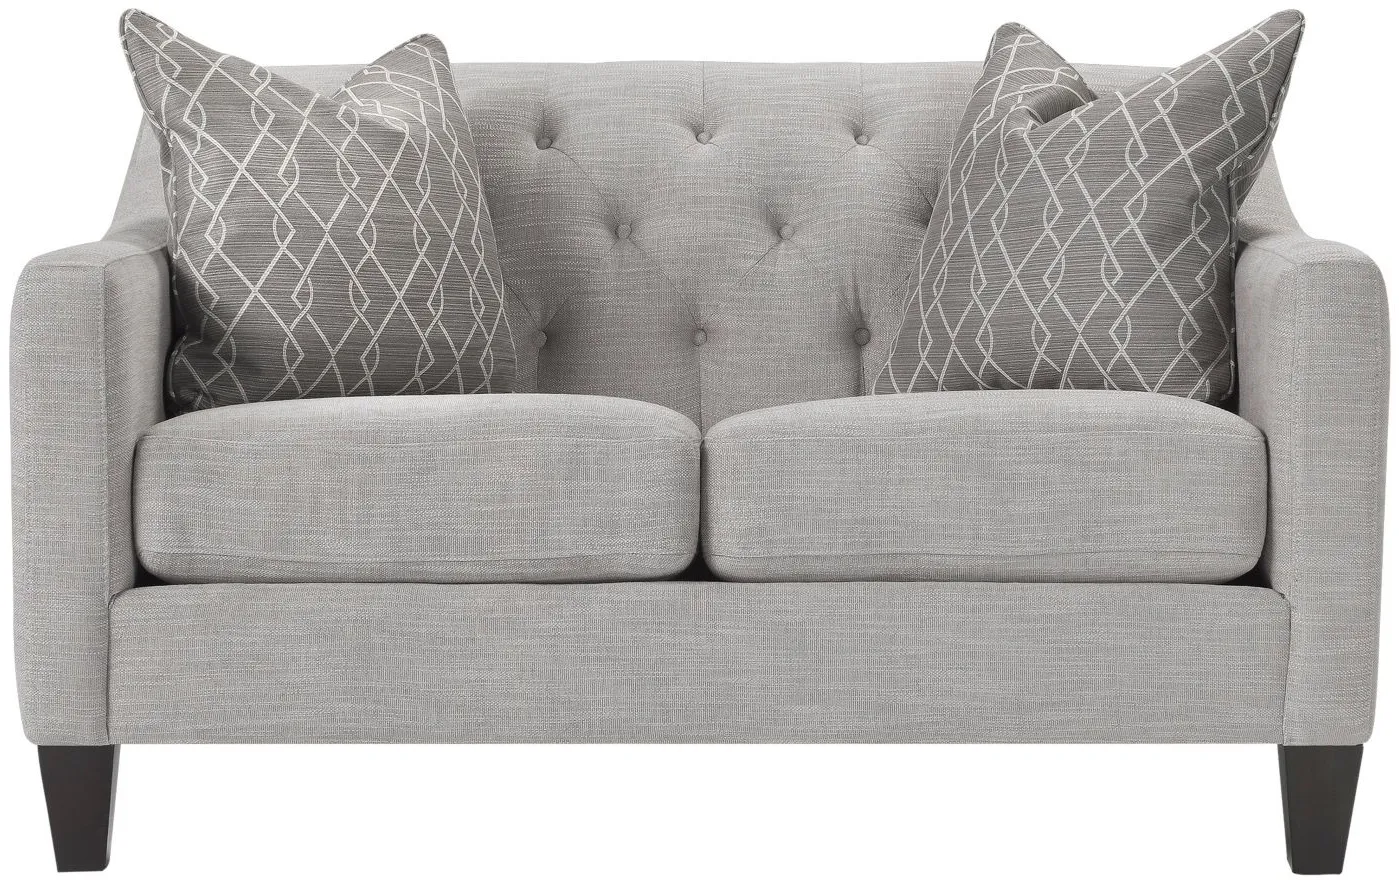 Densmore Loveseat in Mineral by Jackson Furniture